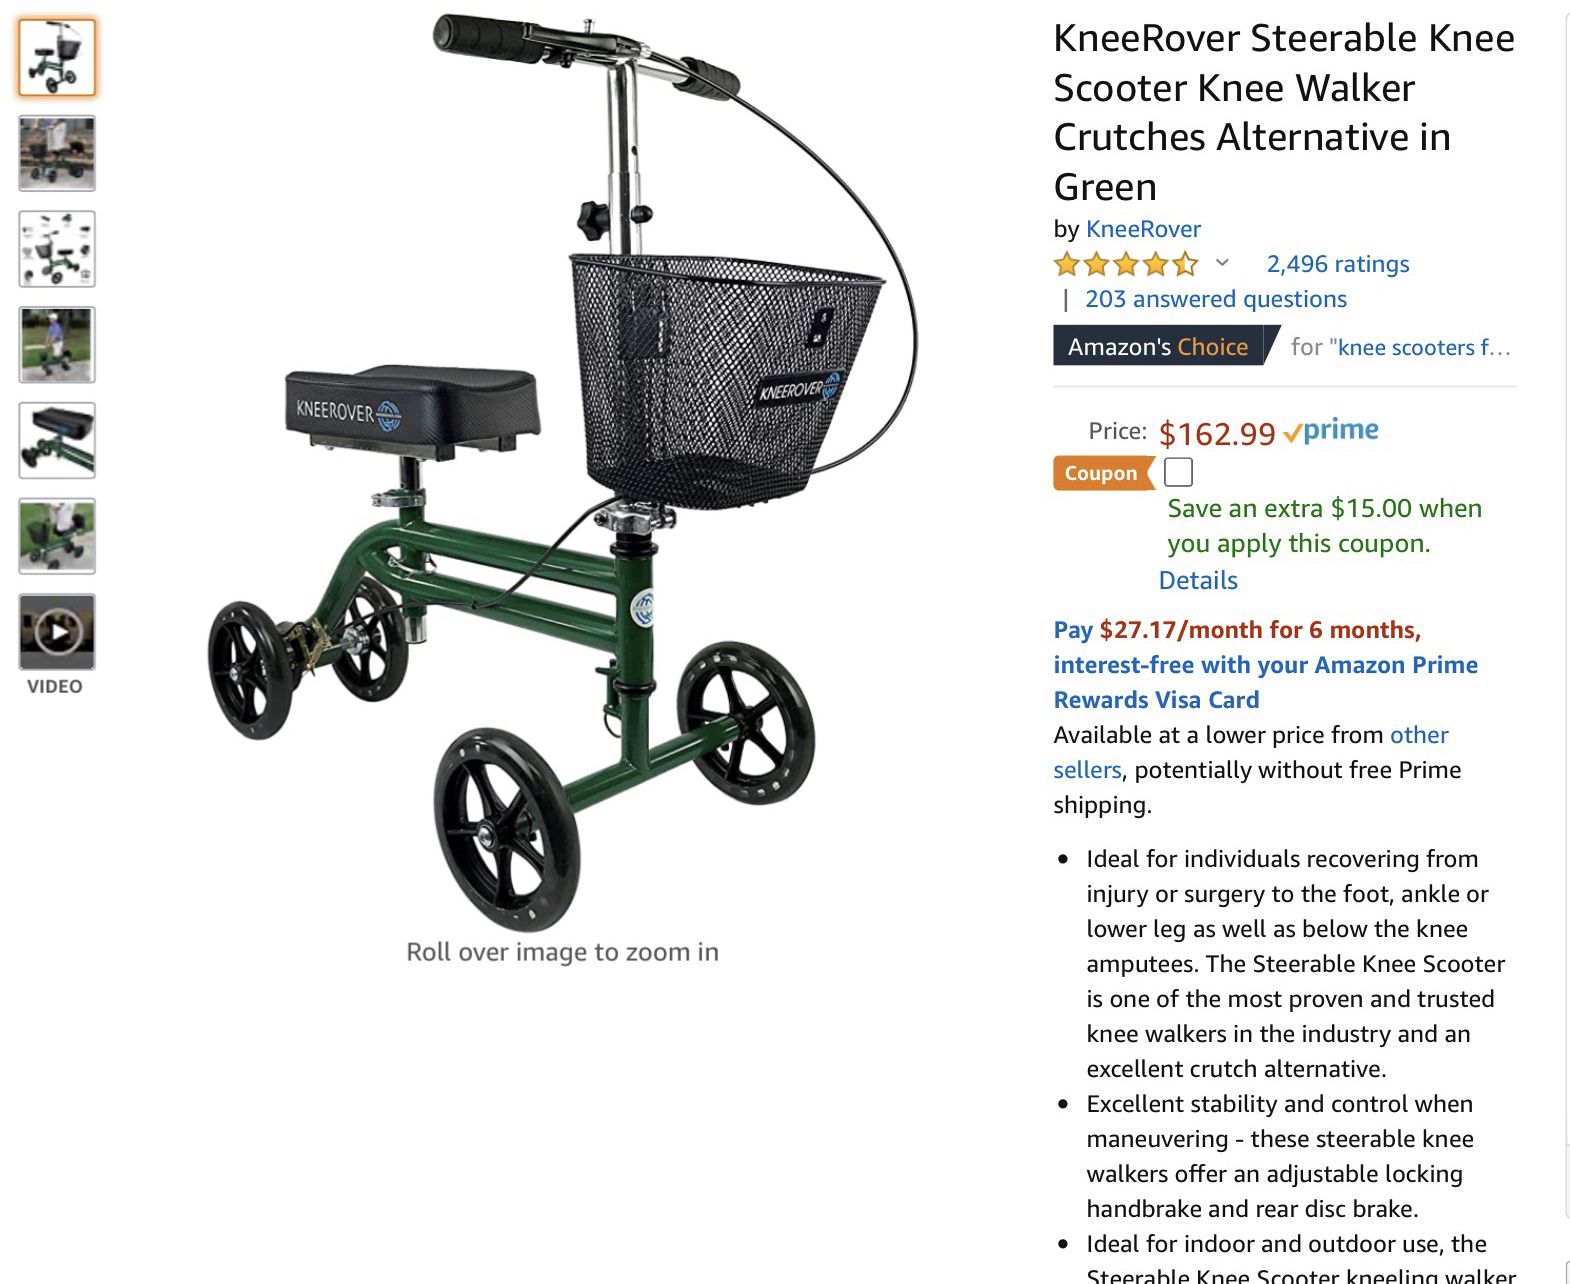 Perfect condition knee scooter walker for injuries